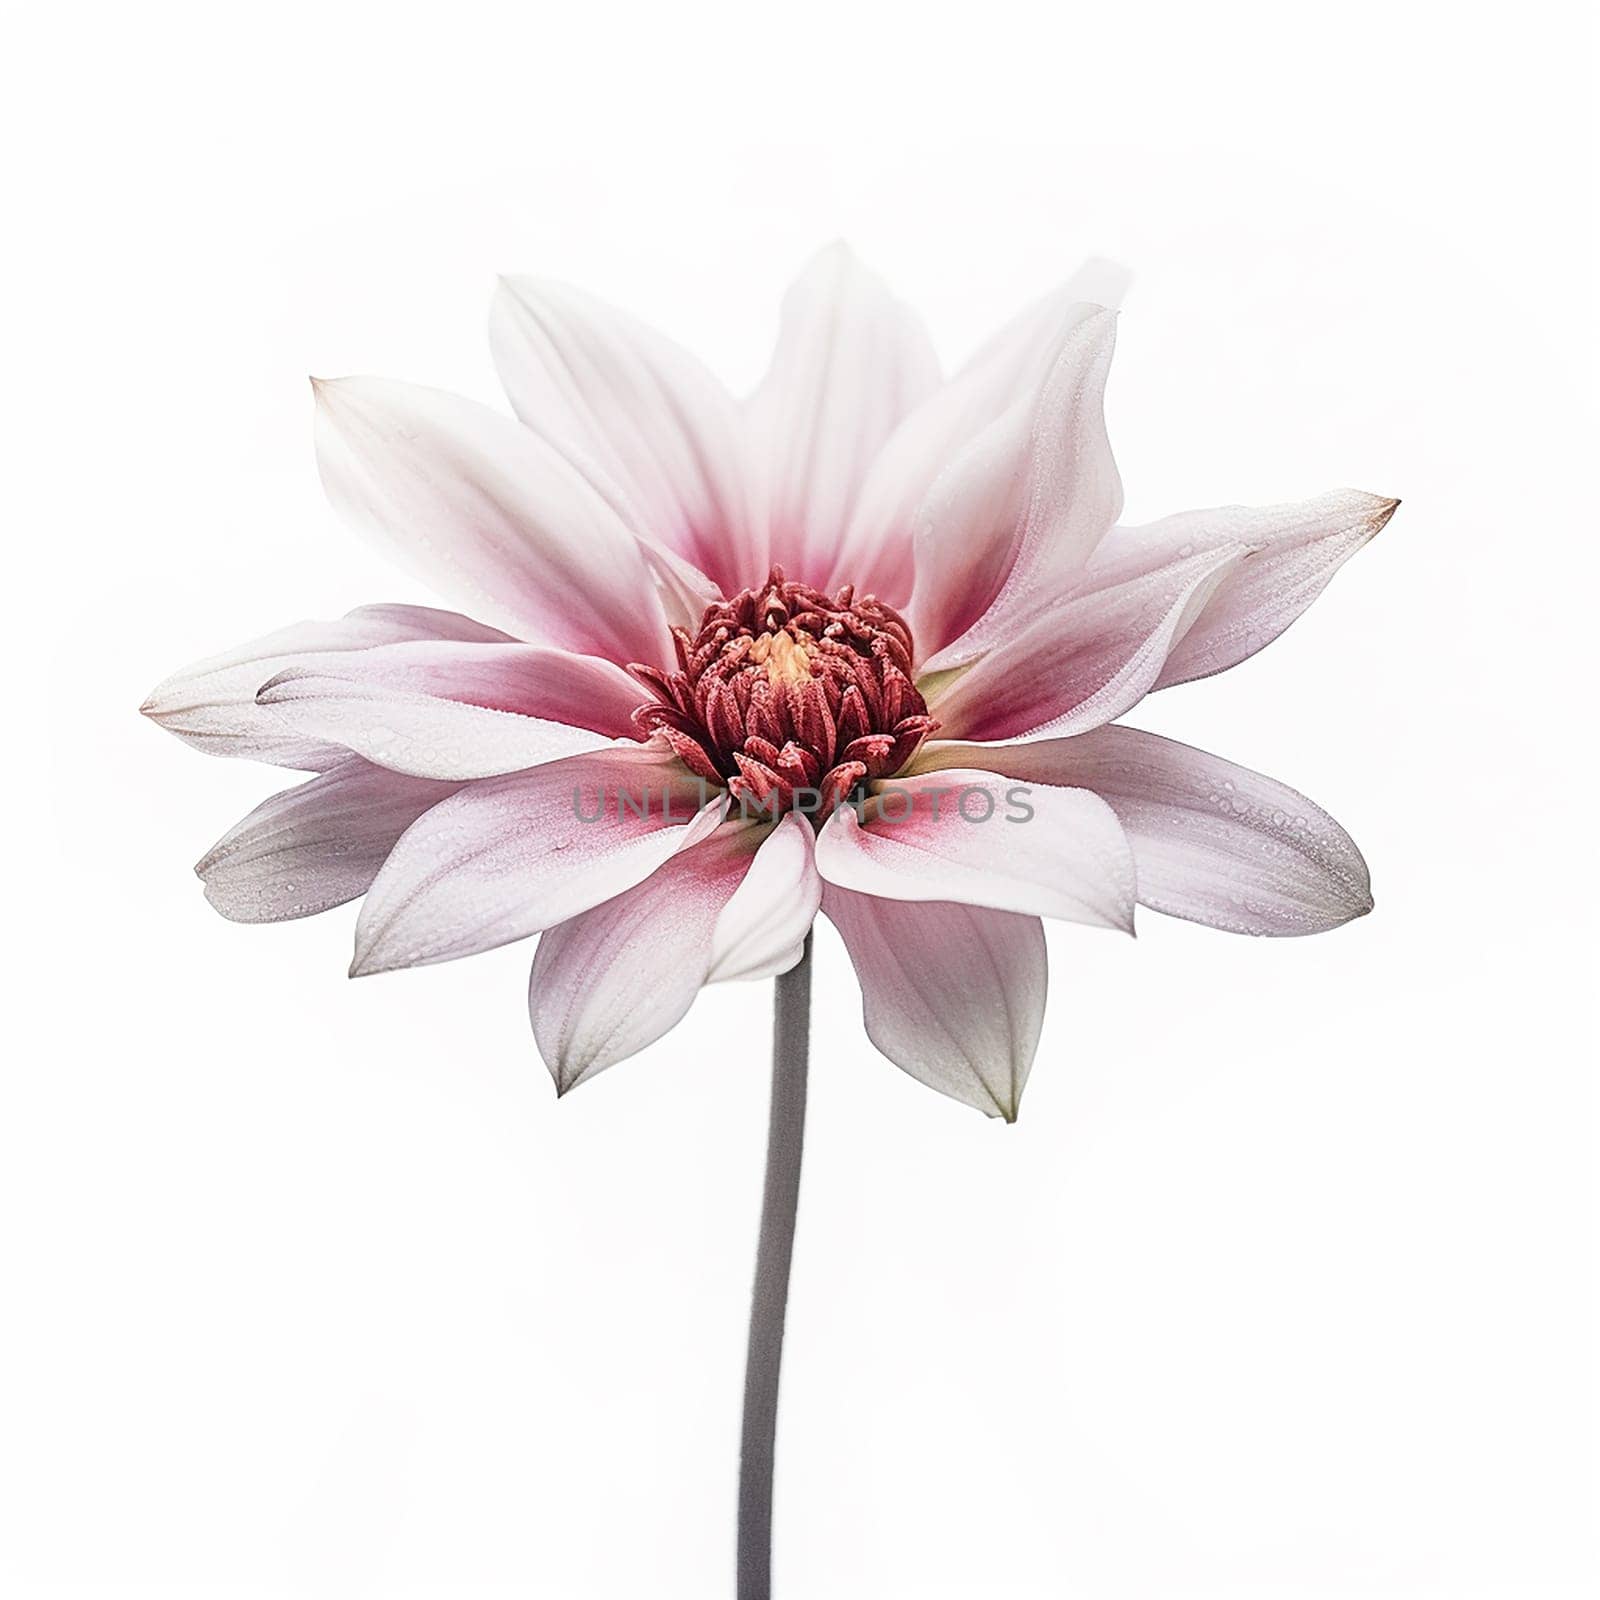 Elegant white and pink flower with delicate petals against a white background.